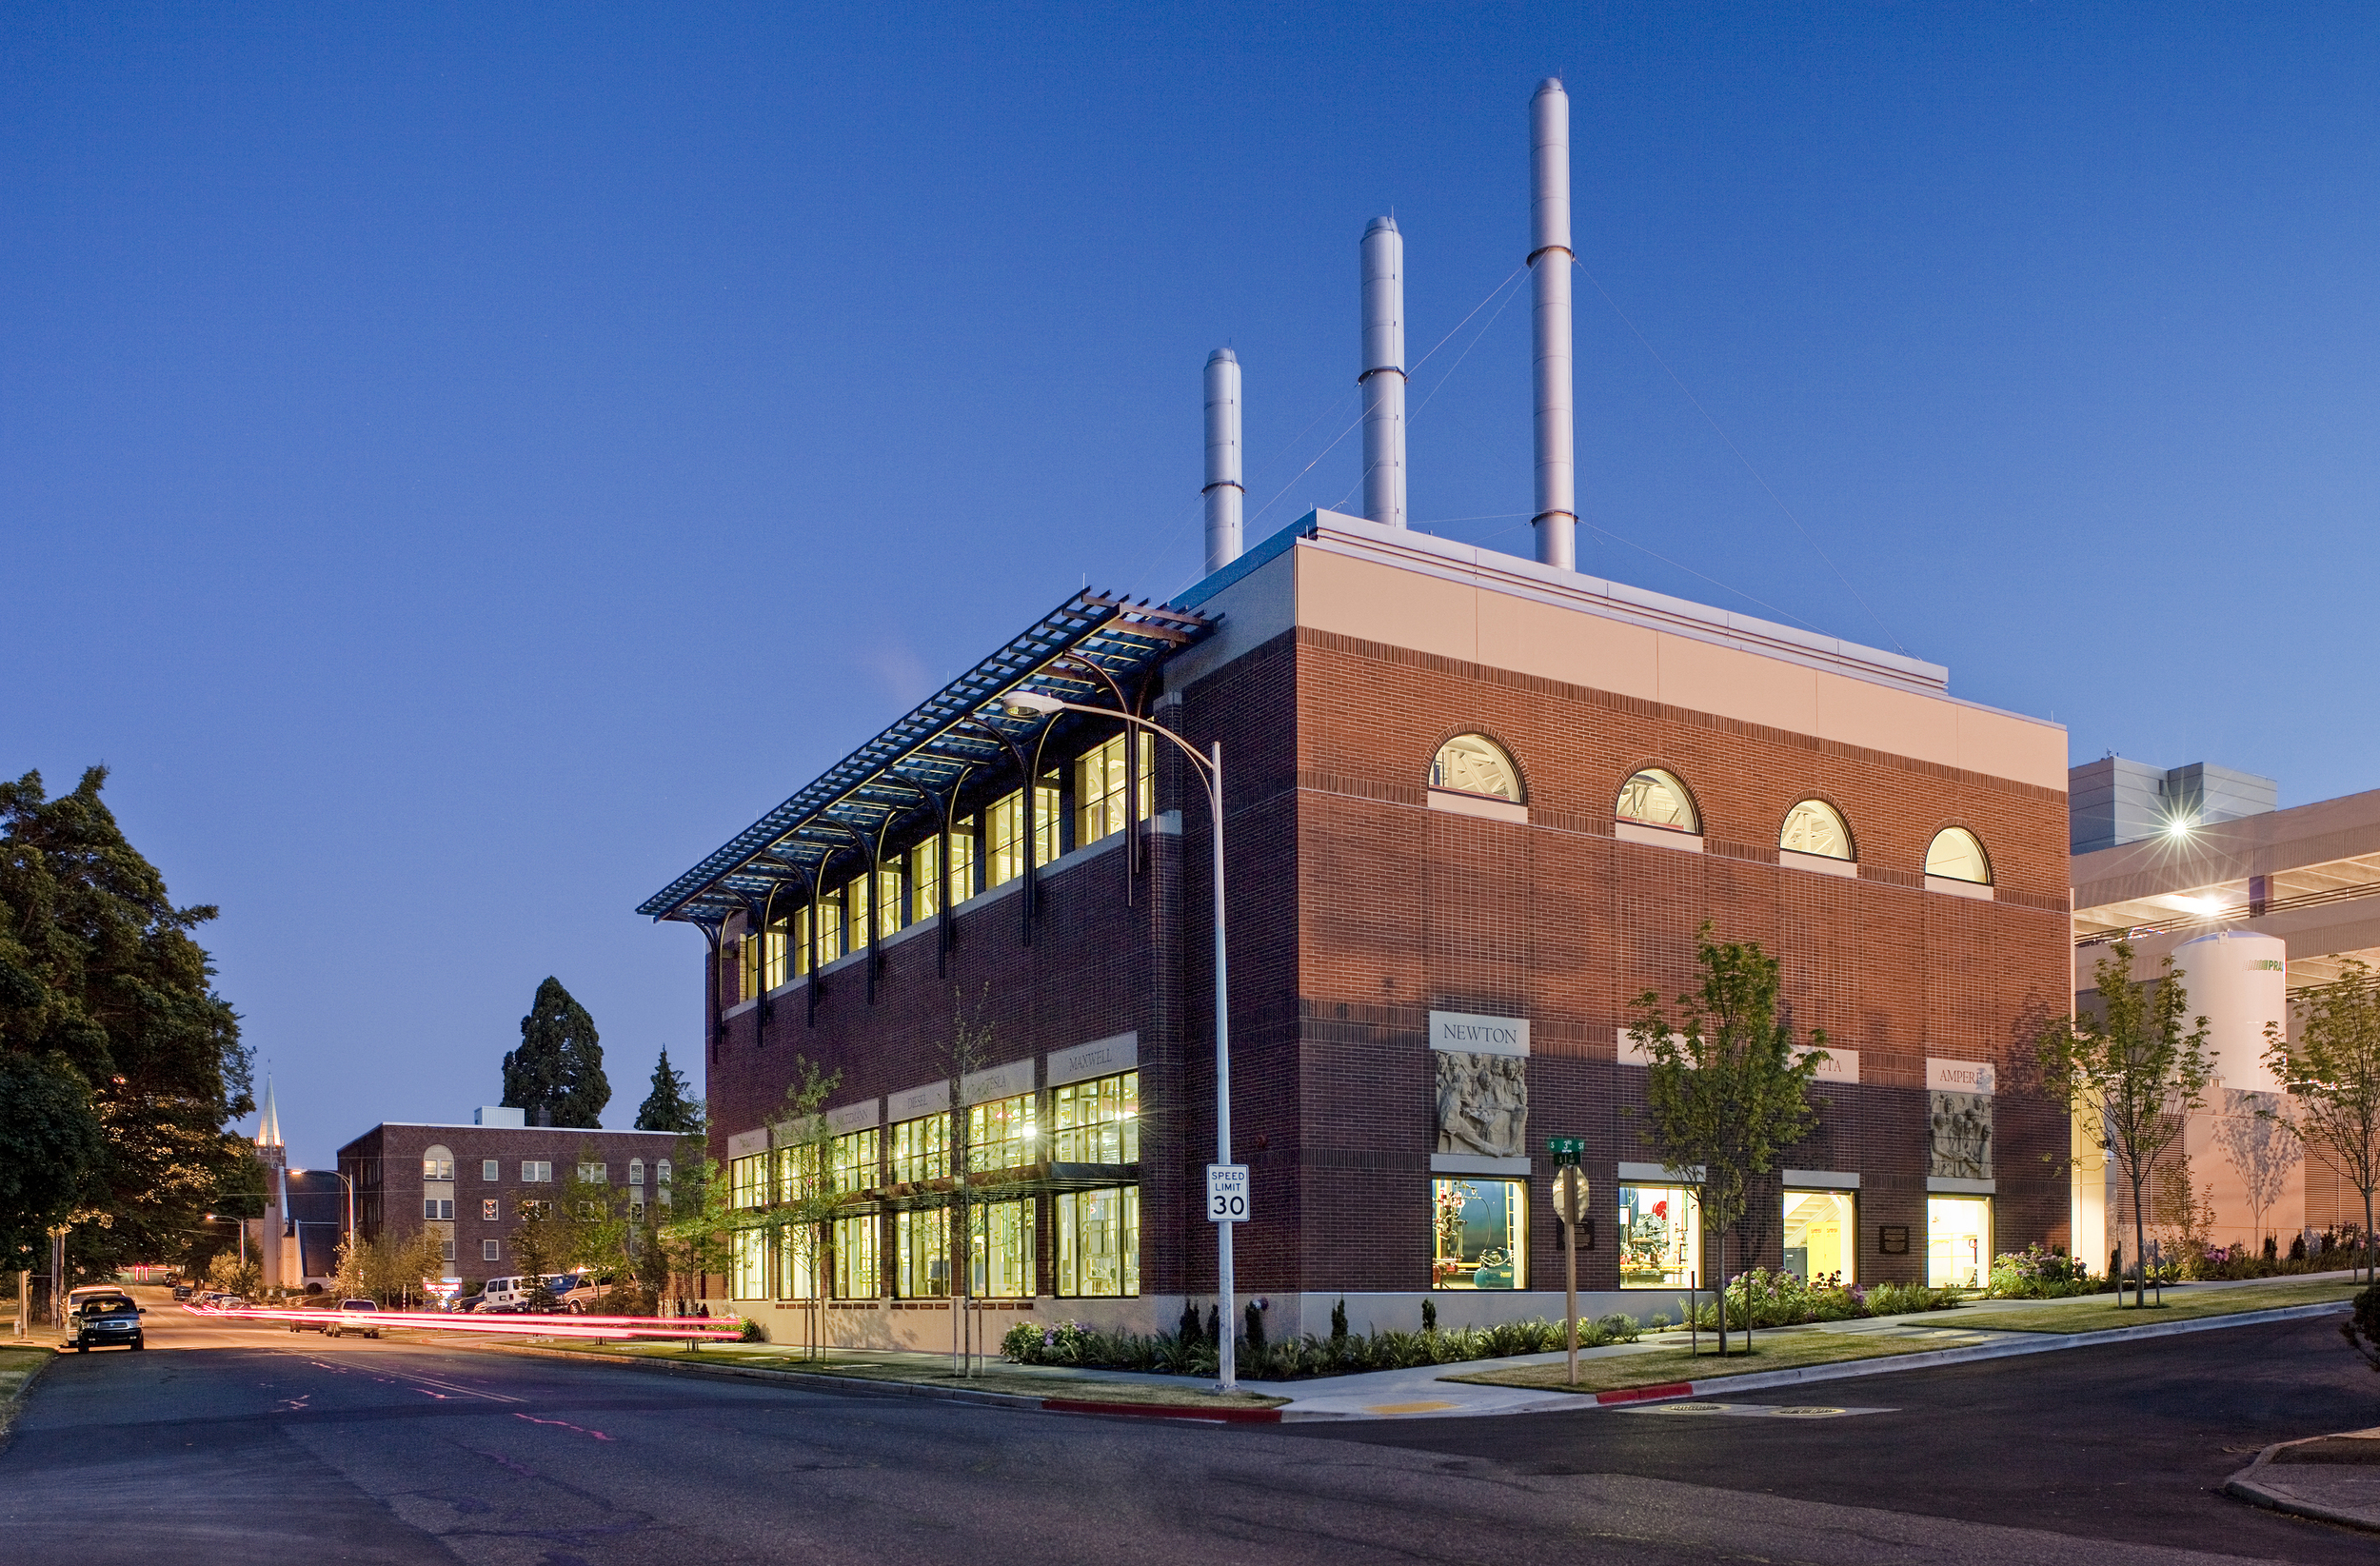  Tacoma General Hospital Boiler Plant  GBJ Architecture 